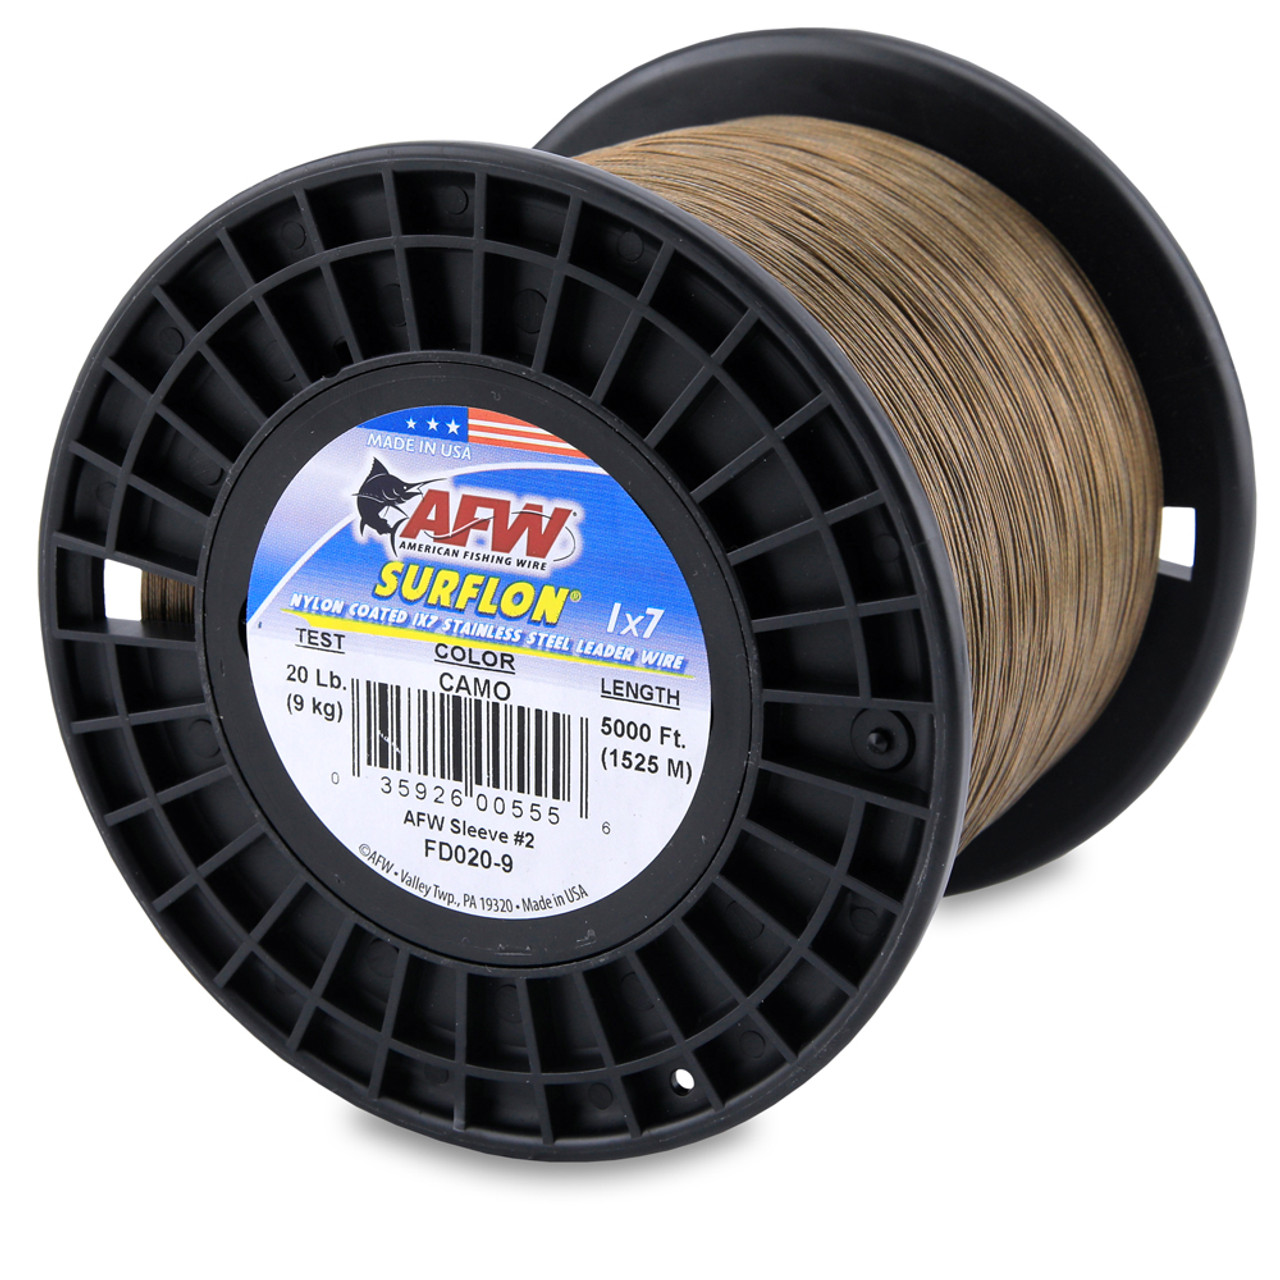 American Fishing Wire Surflon Nylon Coated 1x7 Stainless Steel Leader Wire,  Camo